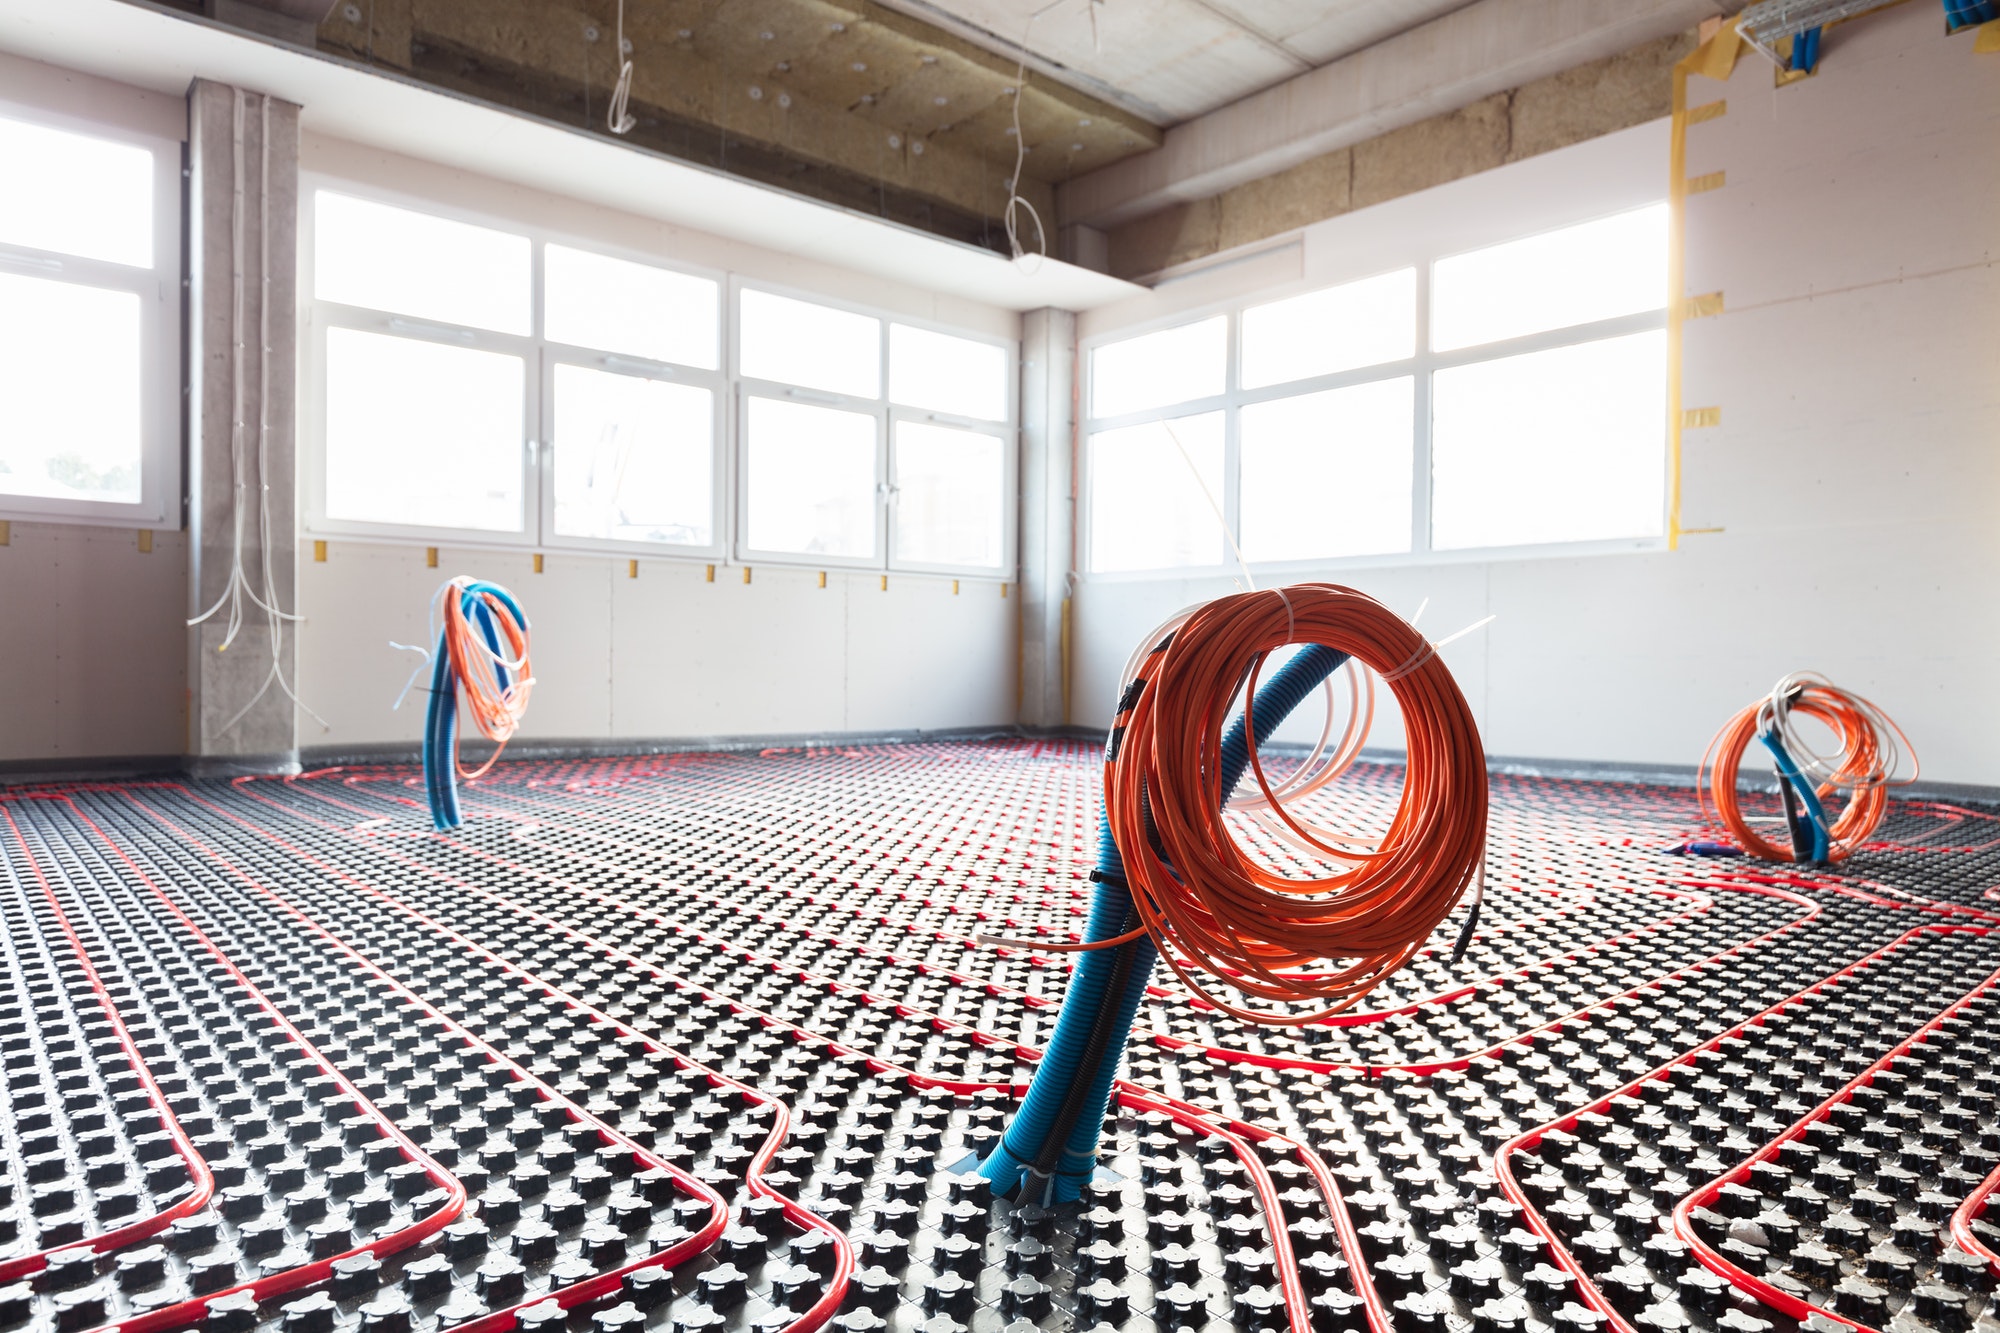 Floor heating and electrical outputs in a new building. Interior design